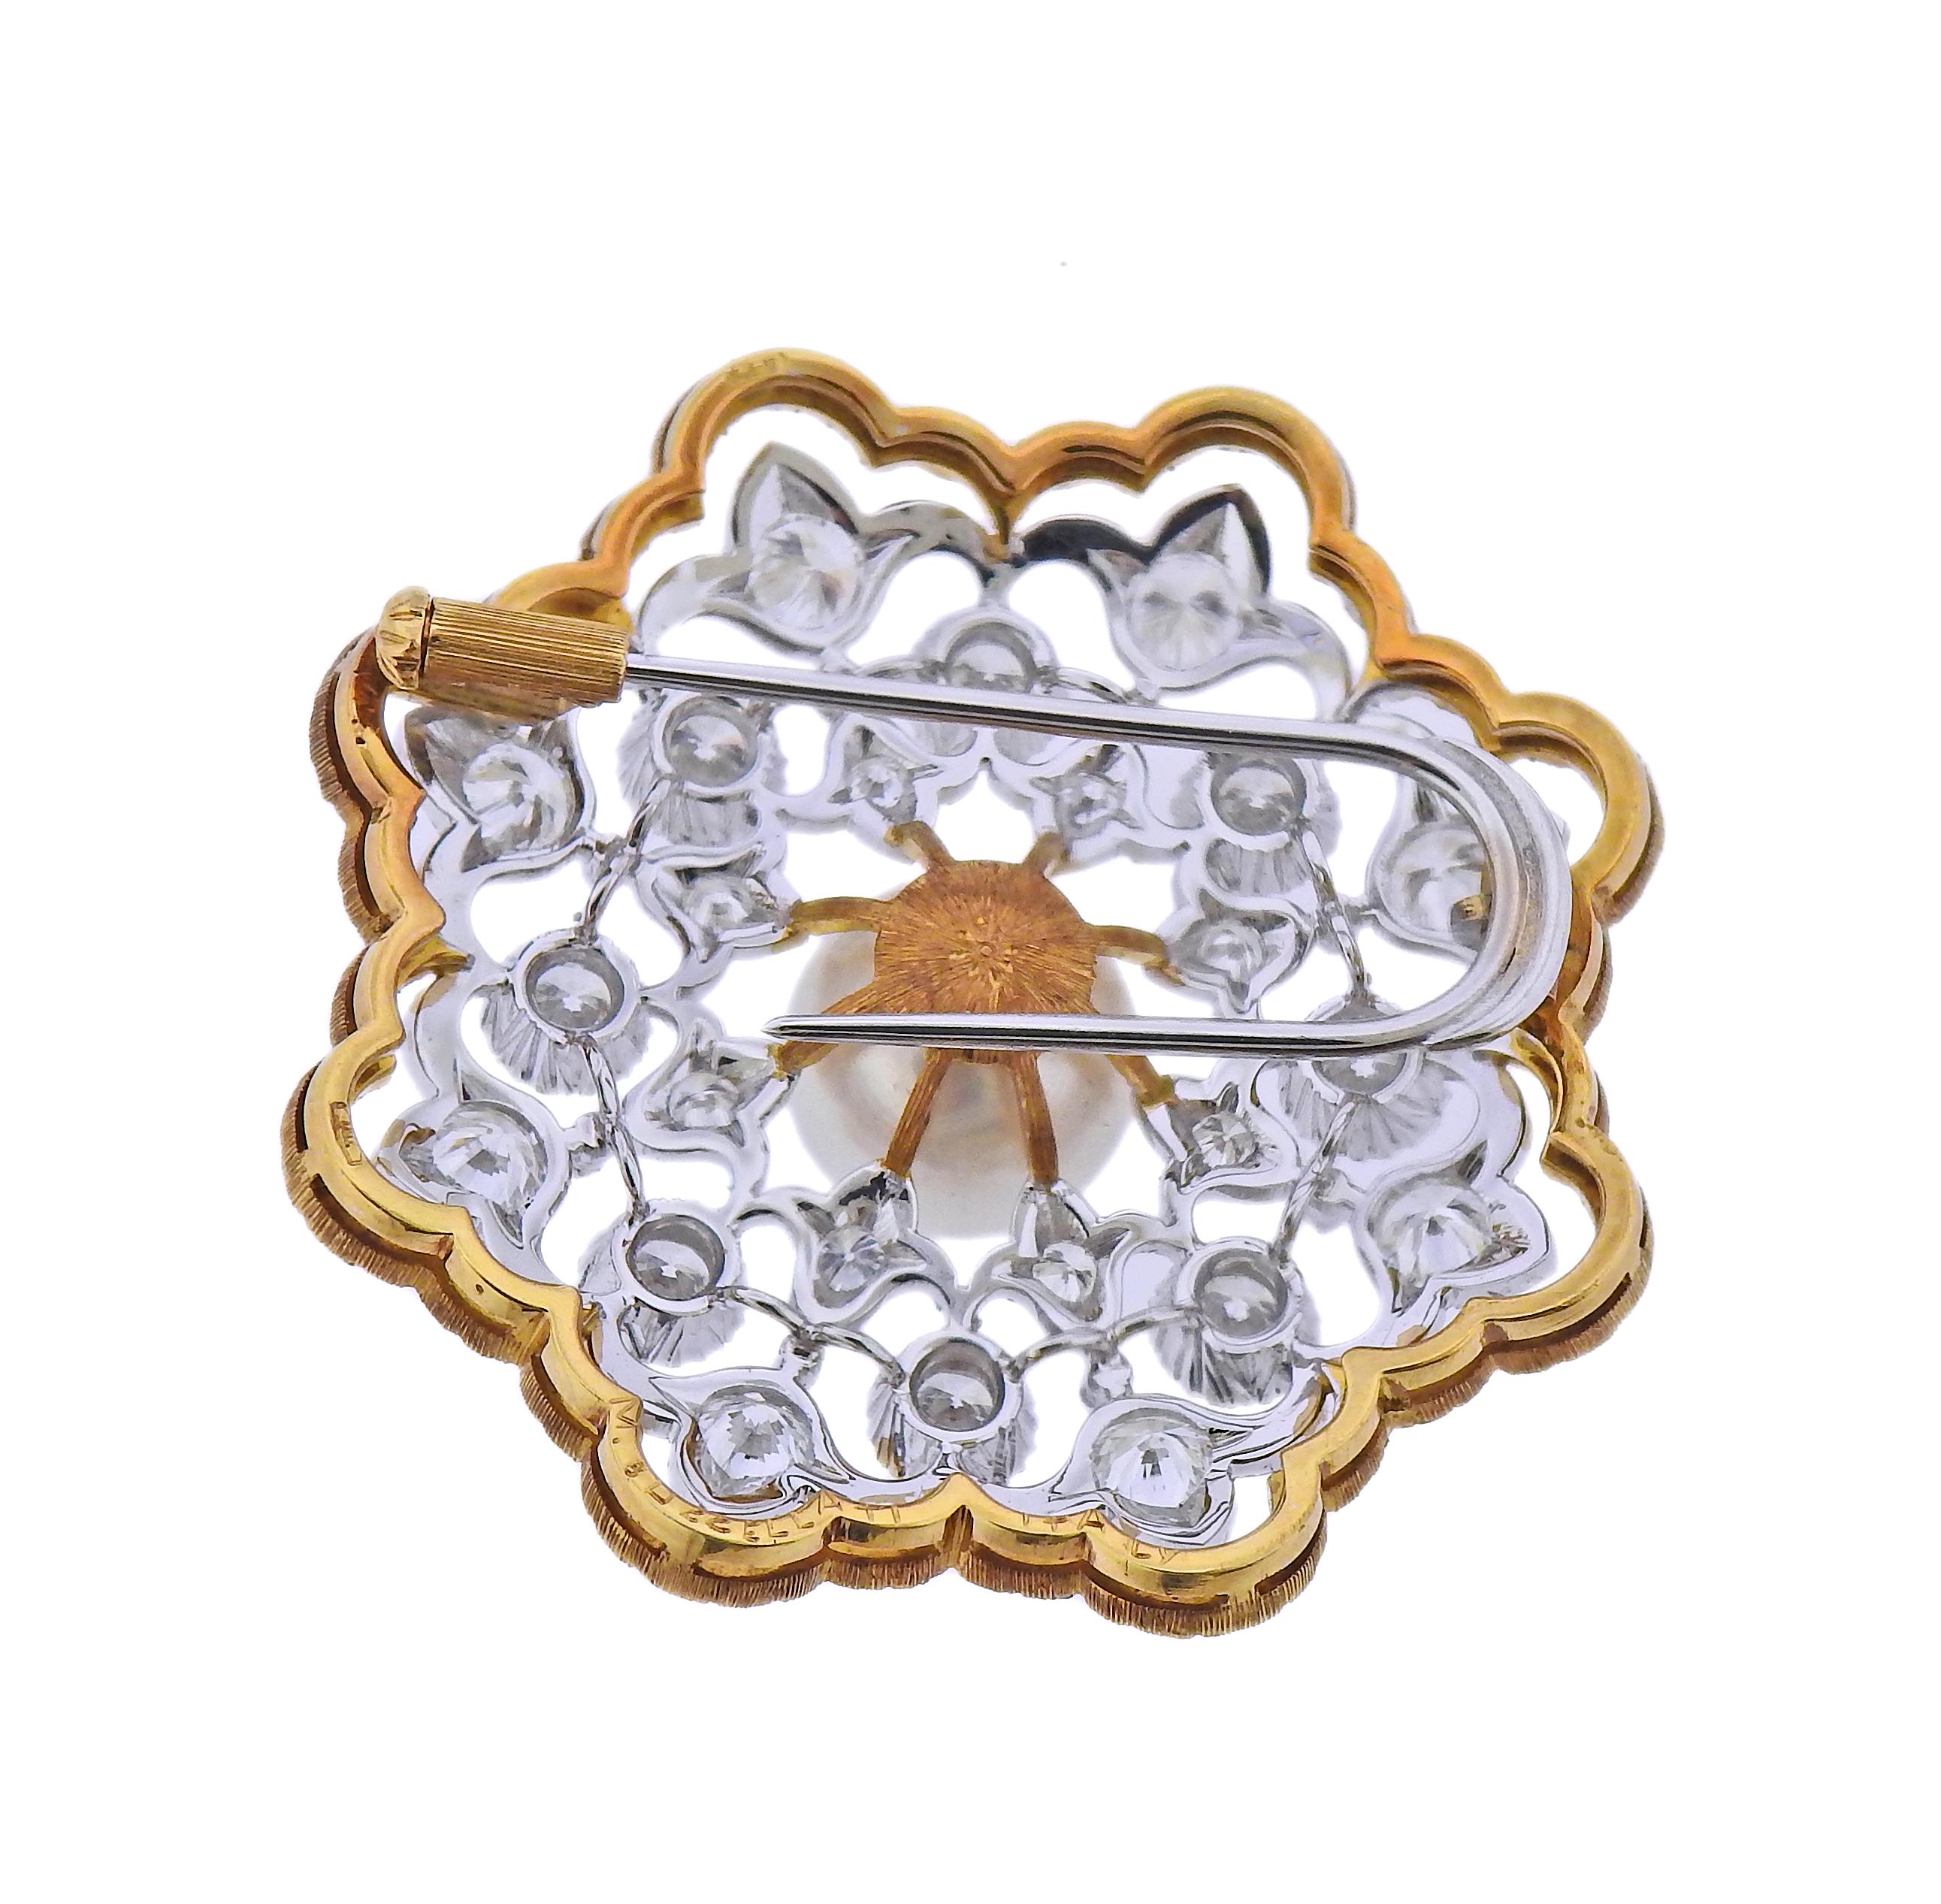 18k white and yellow gold brooch by Buccellati, with 10.3mm pearl and approx. 3.00ctw in H/VS-SI1 diamonds.  Brooch is 40mm x 40mm. Weight 17 grams. Marked: Buccellati, Italy, 18k. 